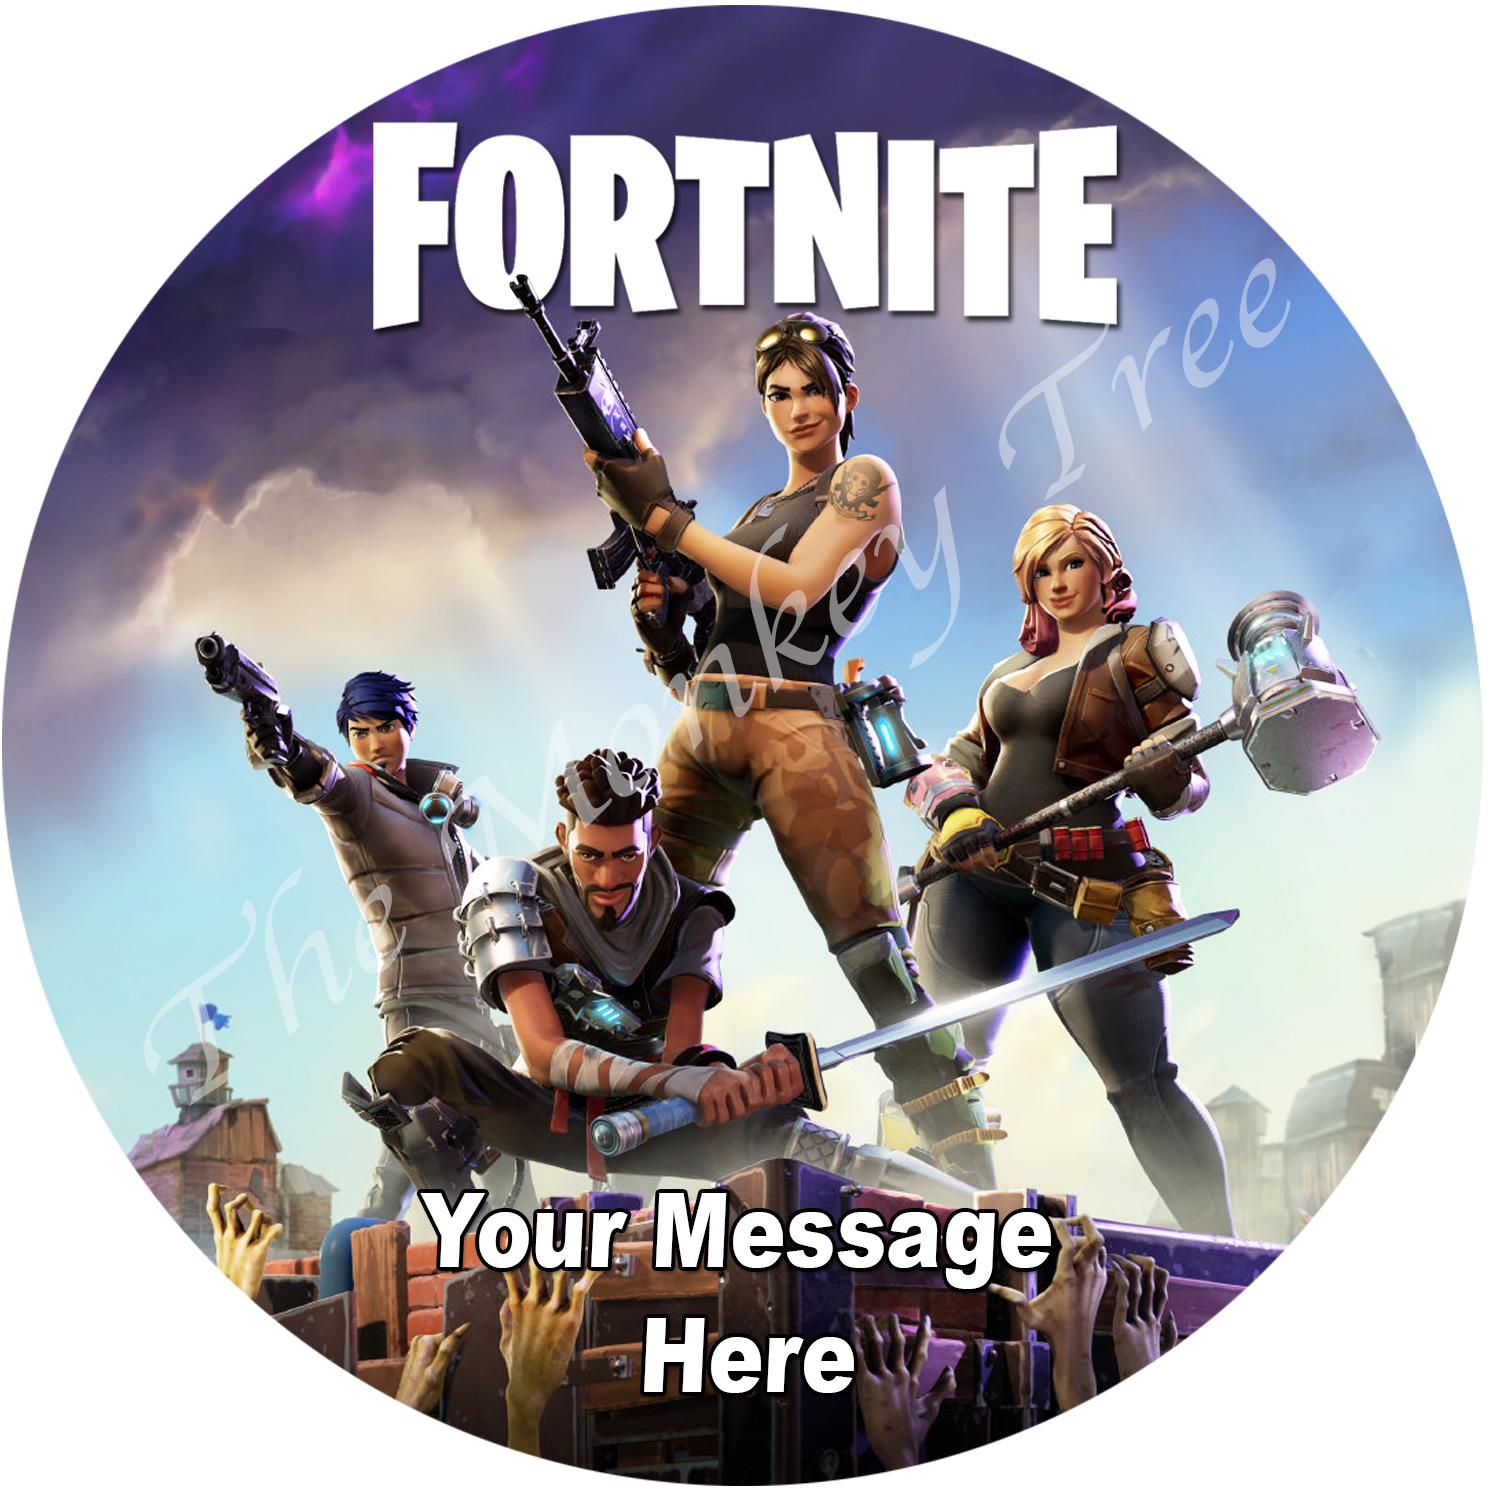 Fortnite Personalised Edible Cake Image Topper | The ...